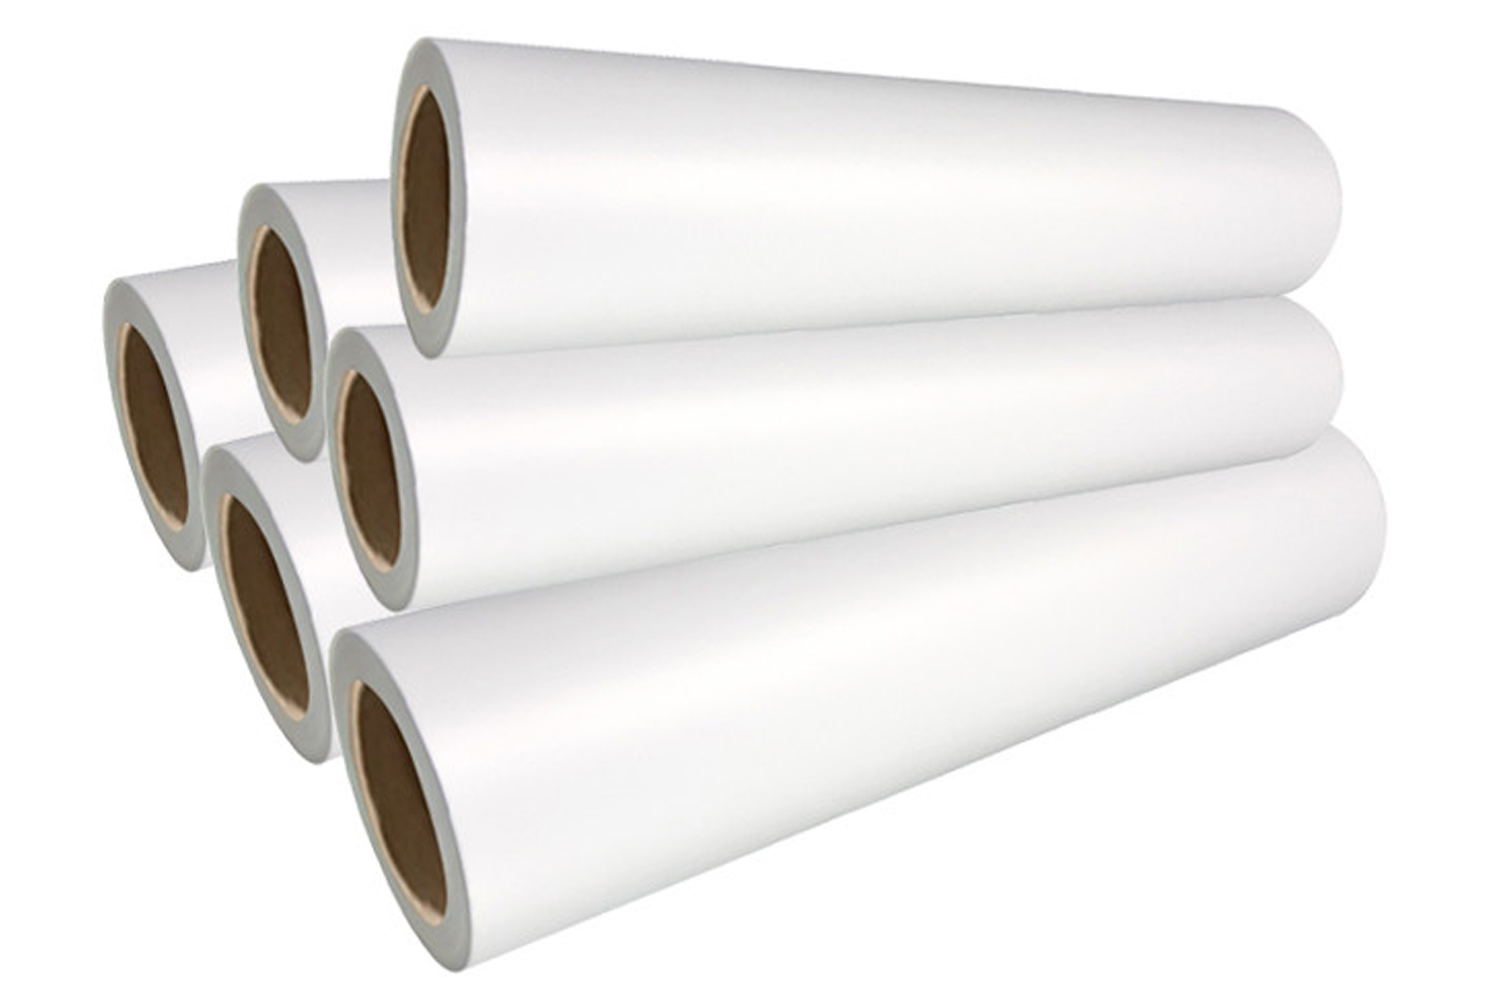 24-inch-cold-peel-roll